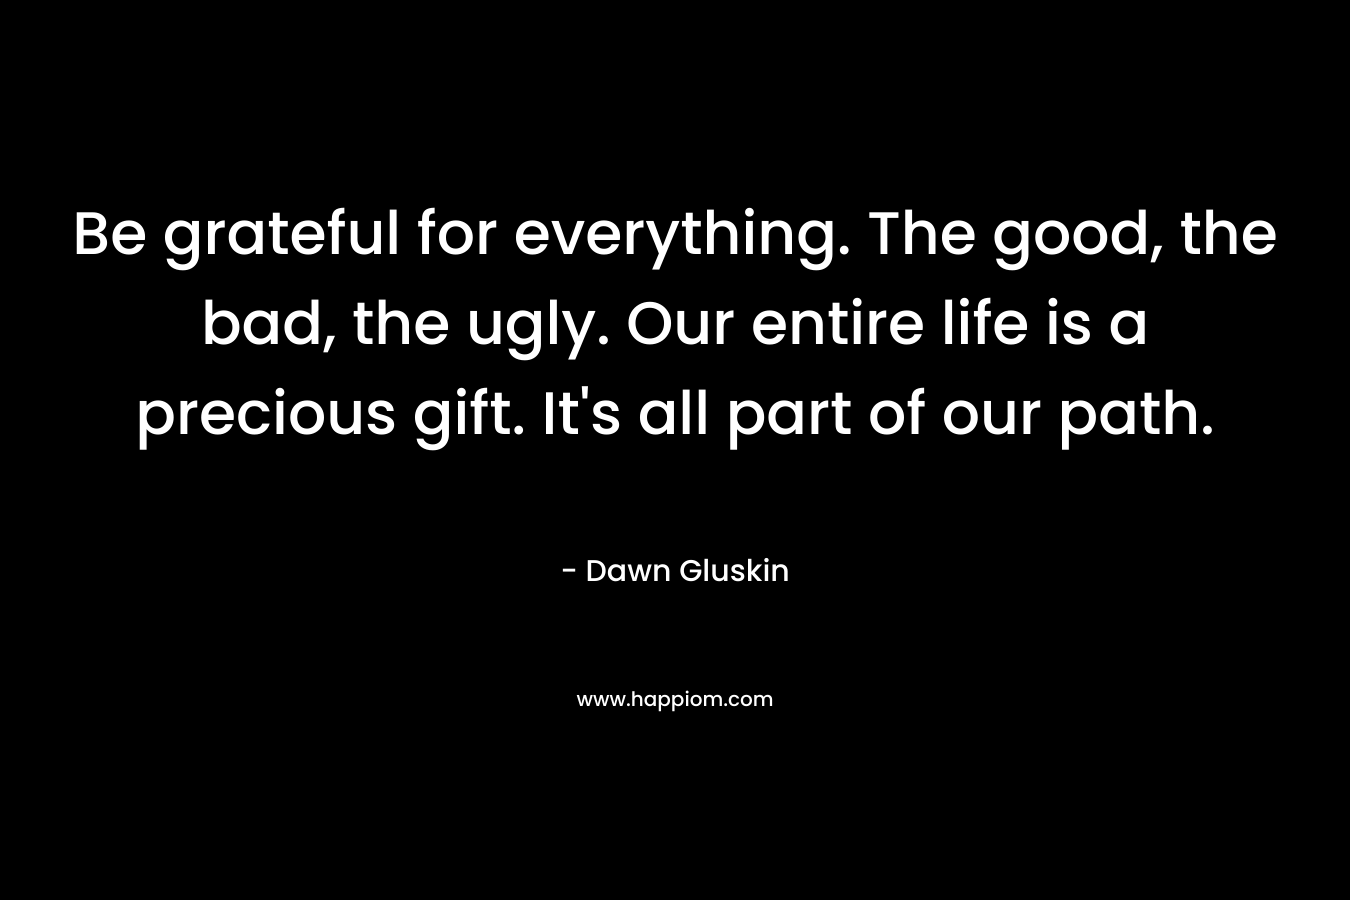 Be grateful for everything. The good, the bad, the ugly. Our entire life is a precious gift. It’s all part of our path. – Dawn Gluskin